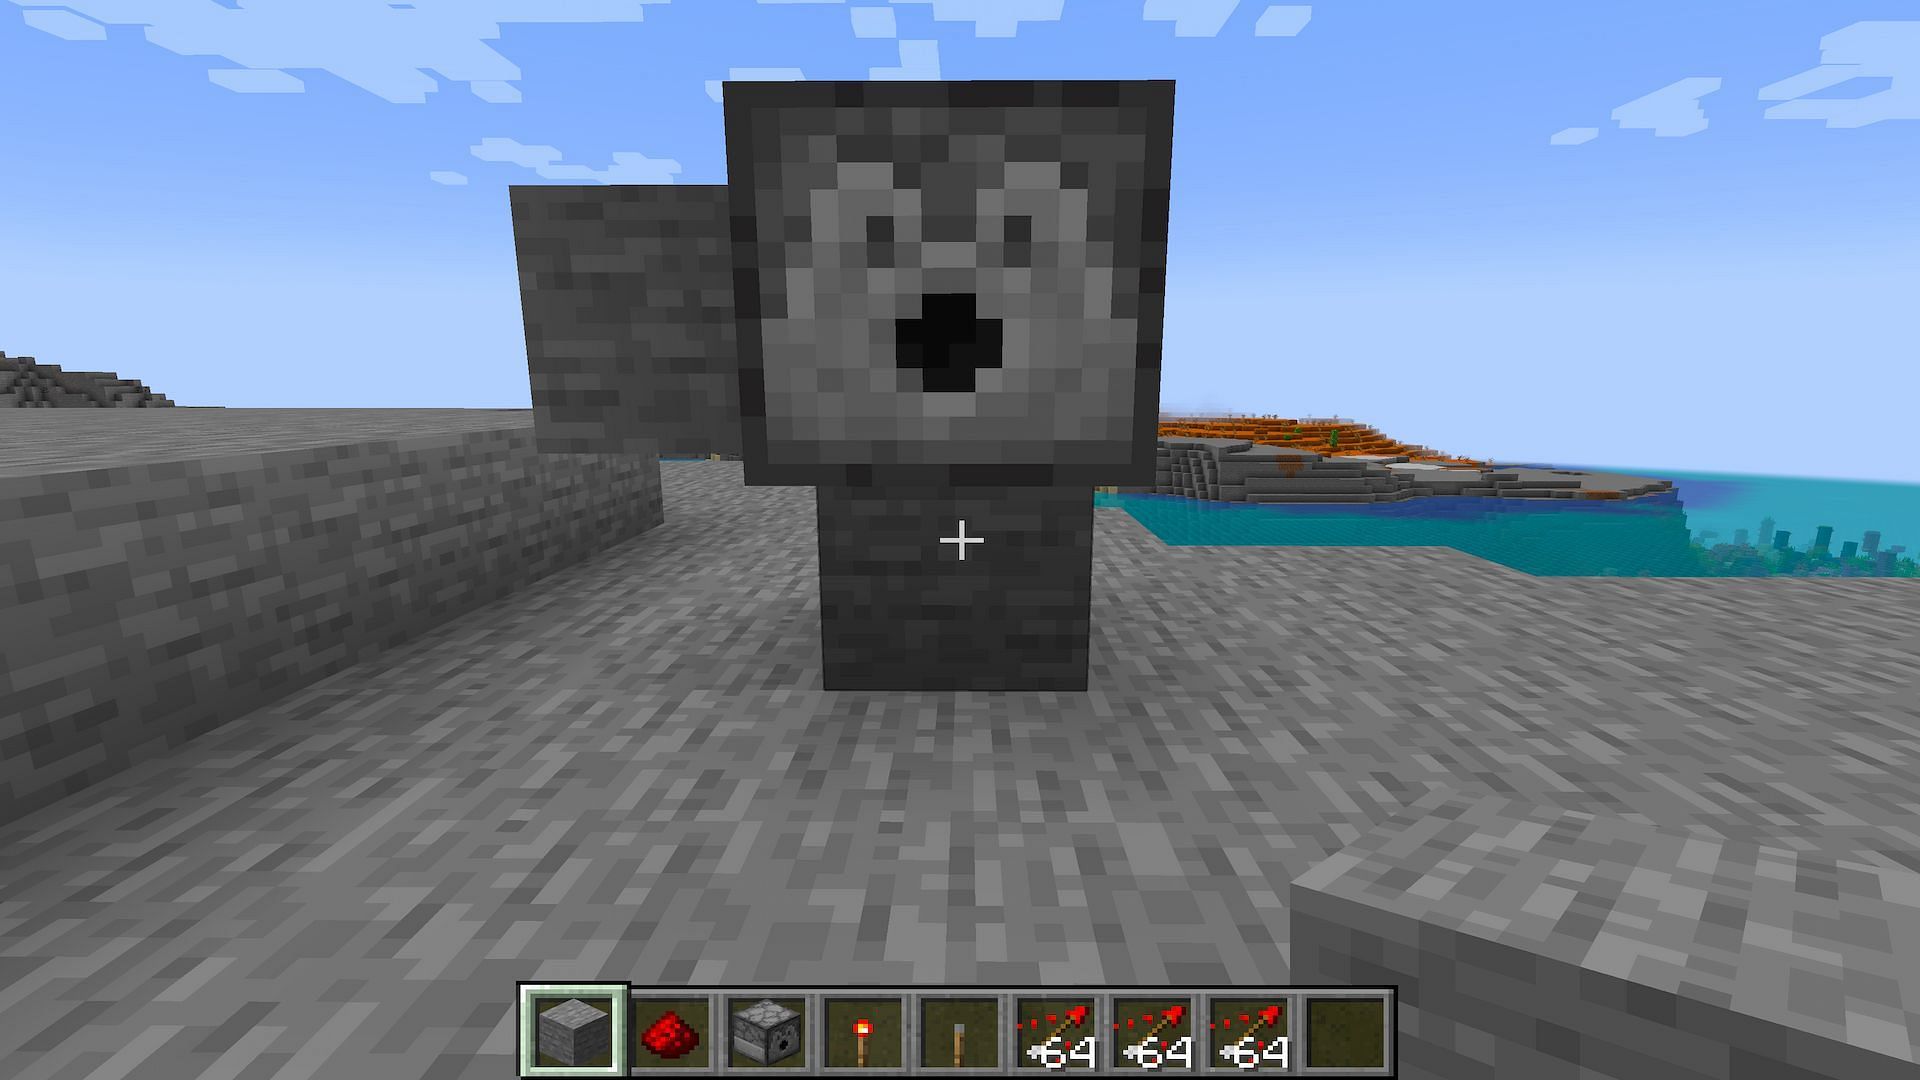 Players can place the dispenser in front of the original block in the direction they wish to fire (Image via Minecraft)